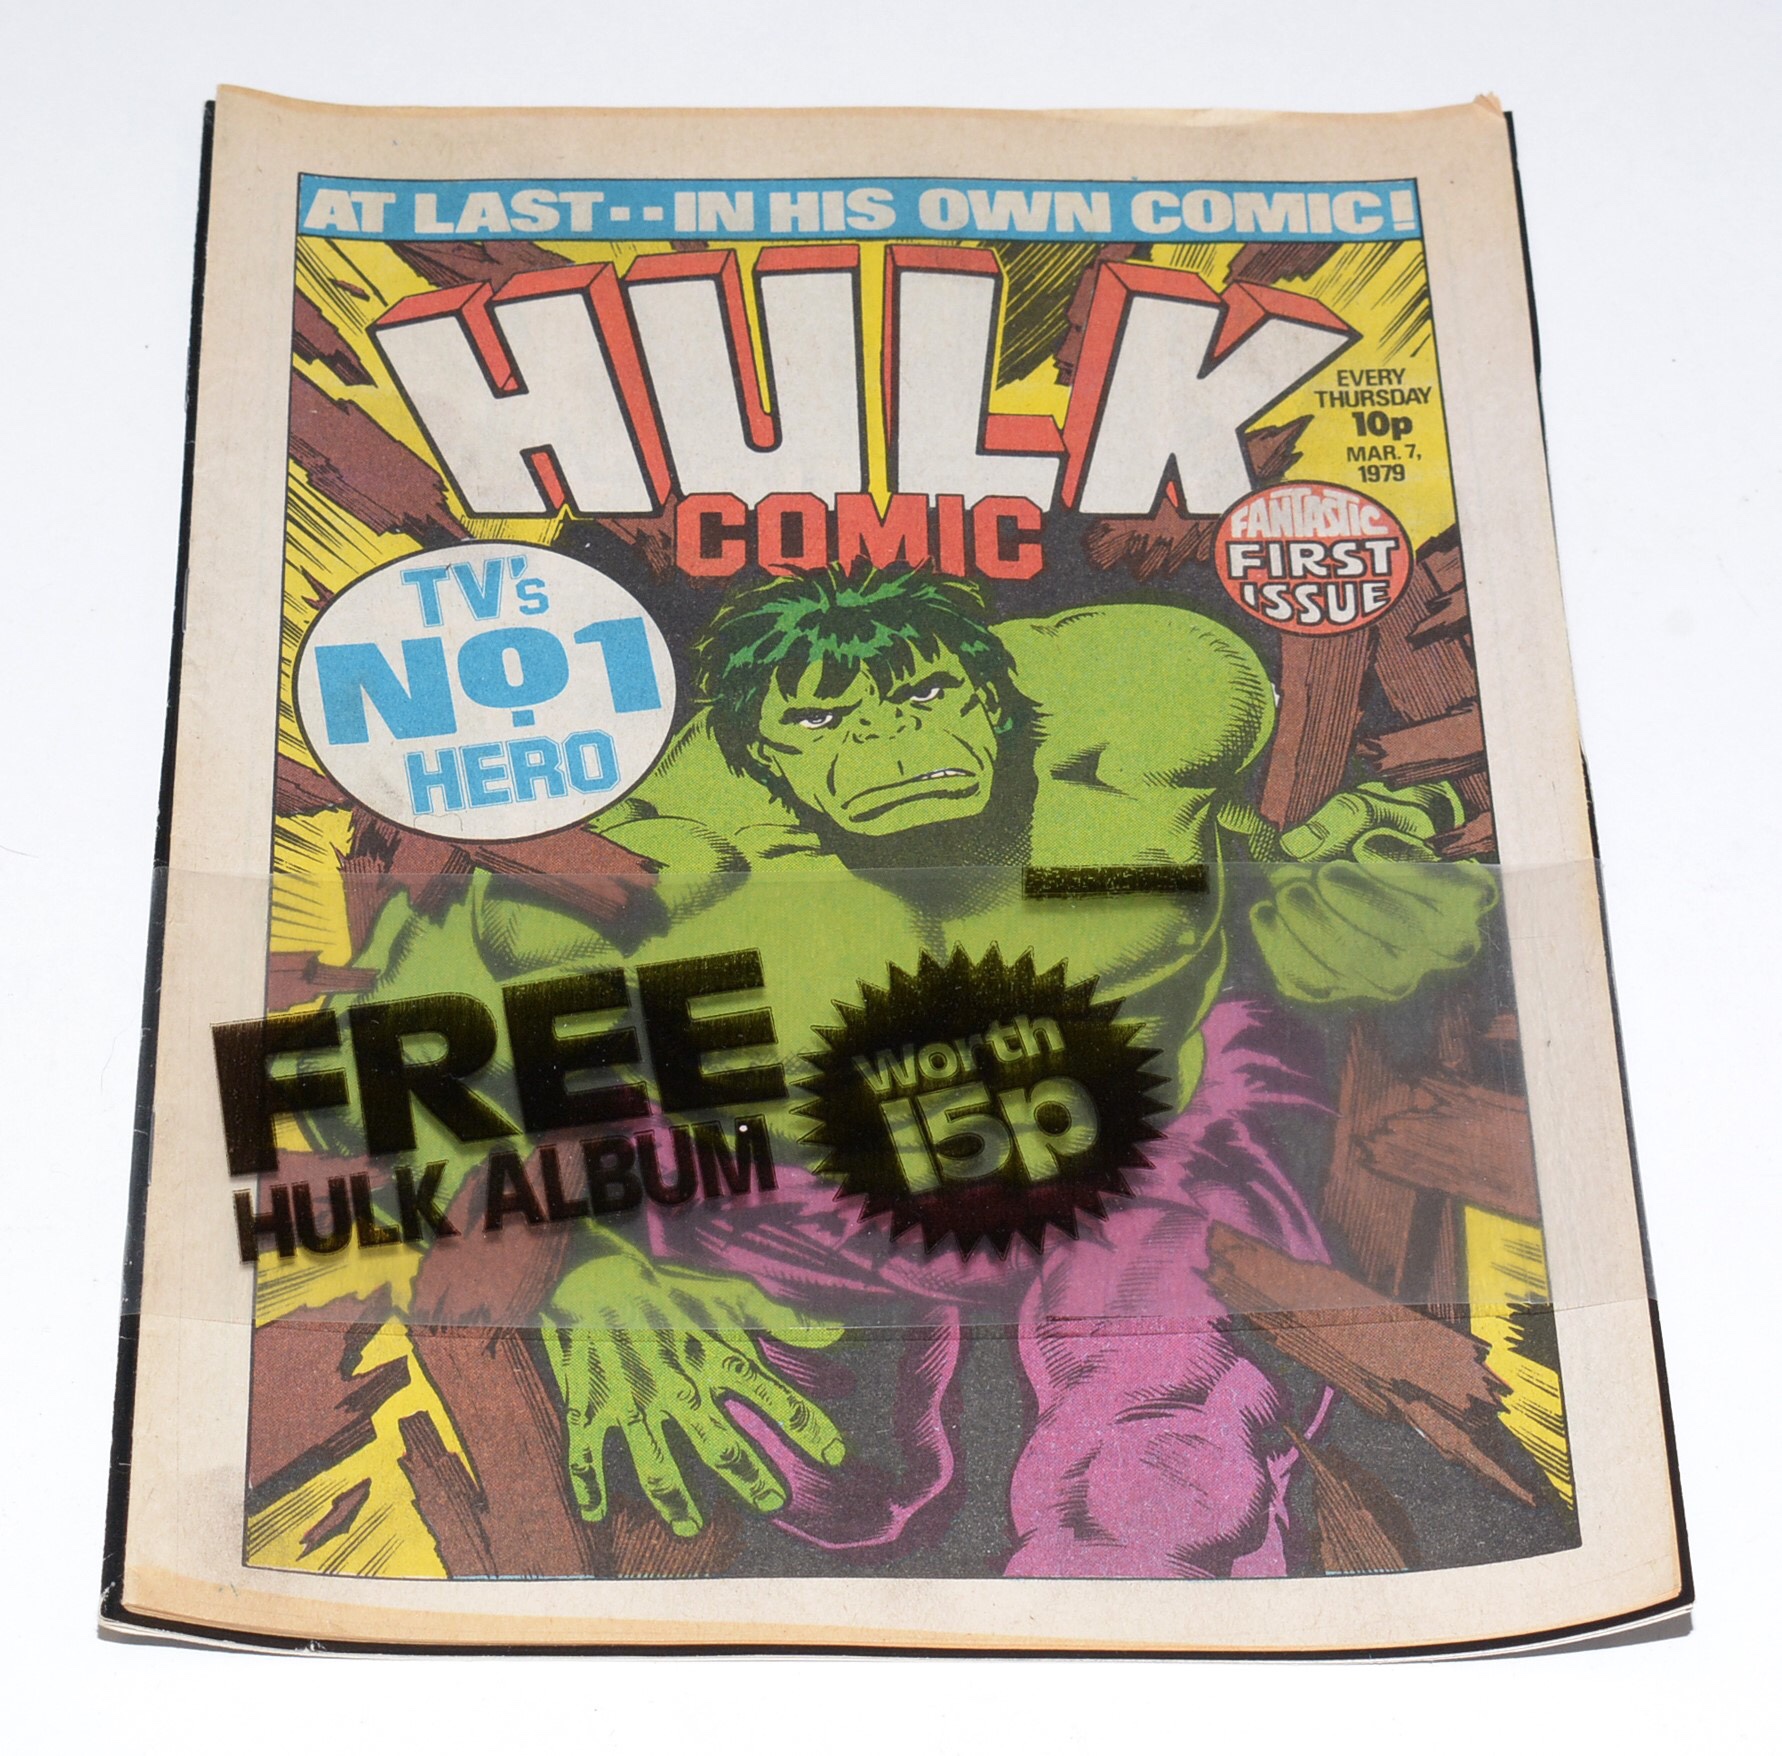 Hulk Comic No. 1 cover dated 7th March 1979, with free gift - Hulk Album